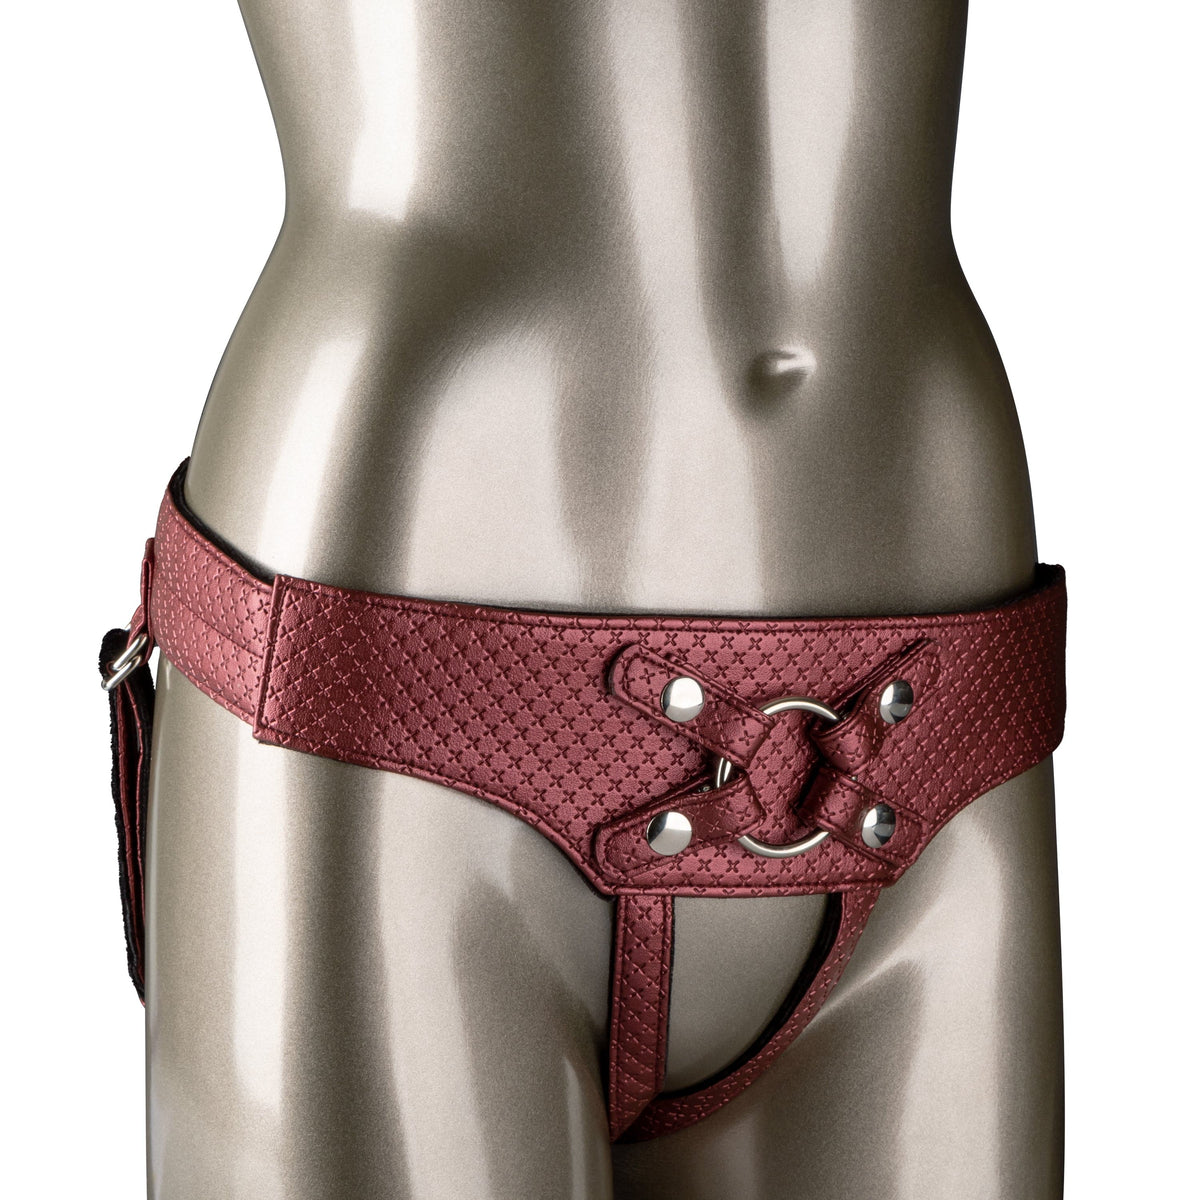 California Exotics - Her Royal Harness The Regal Empress Crotchless Strap On CE1918 CherryAffairs